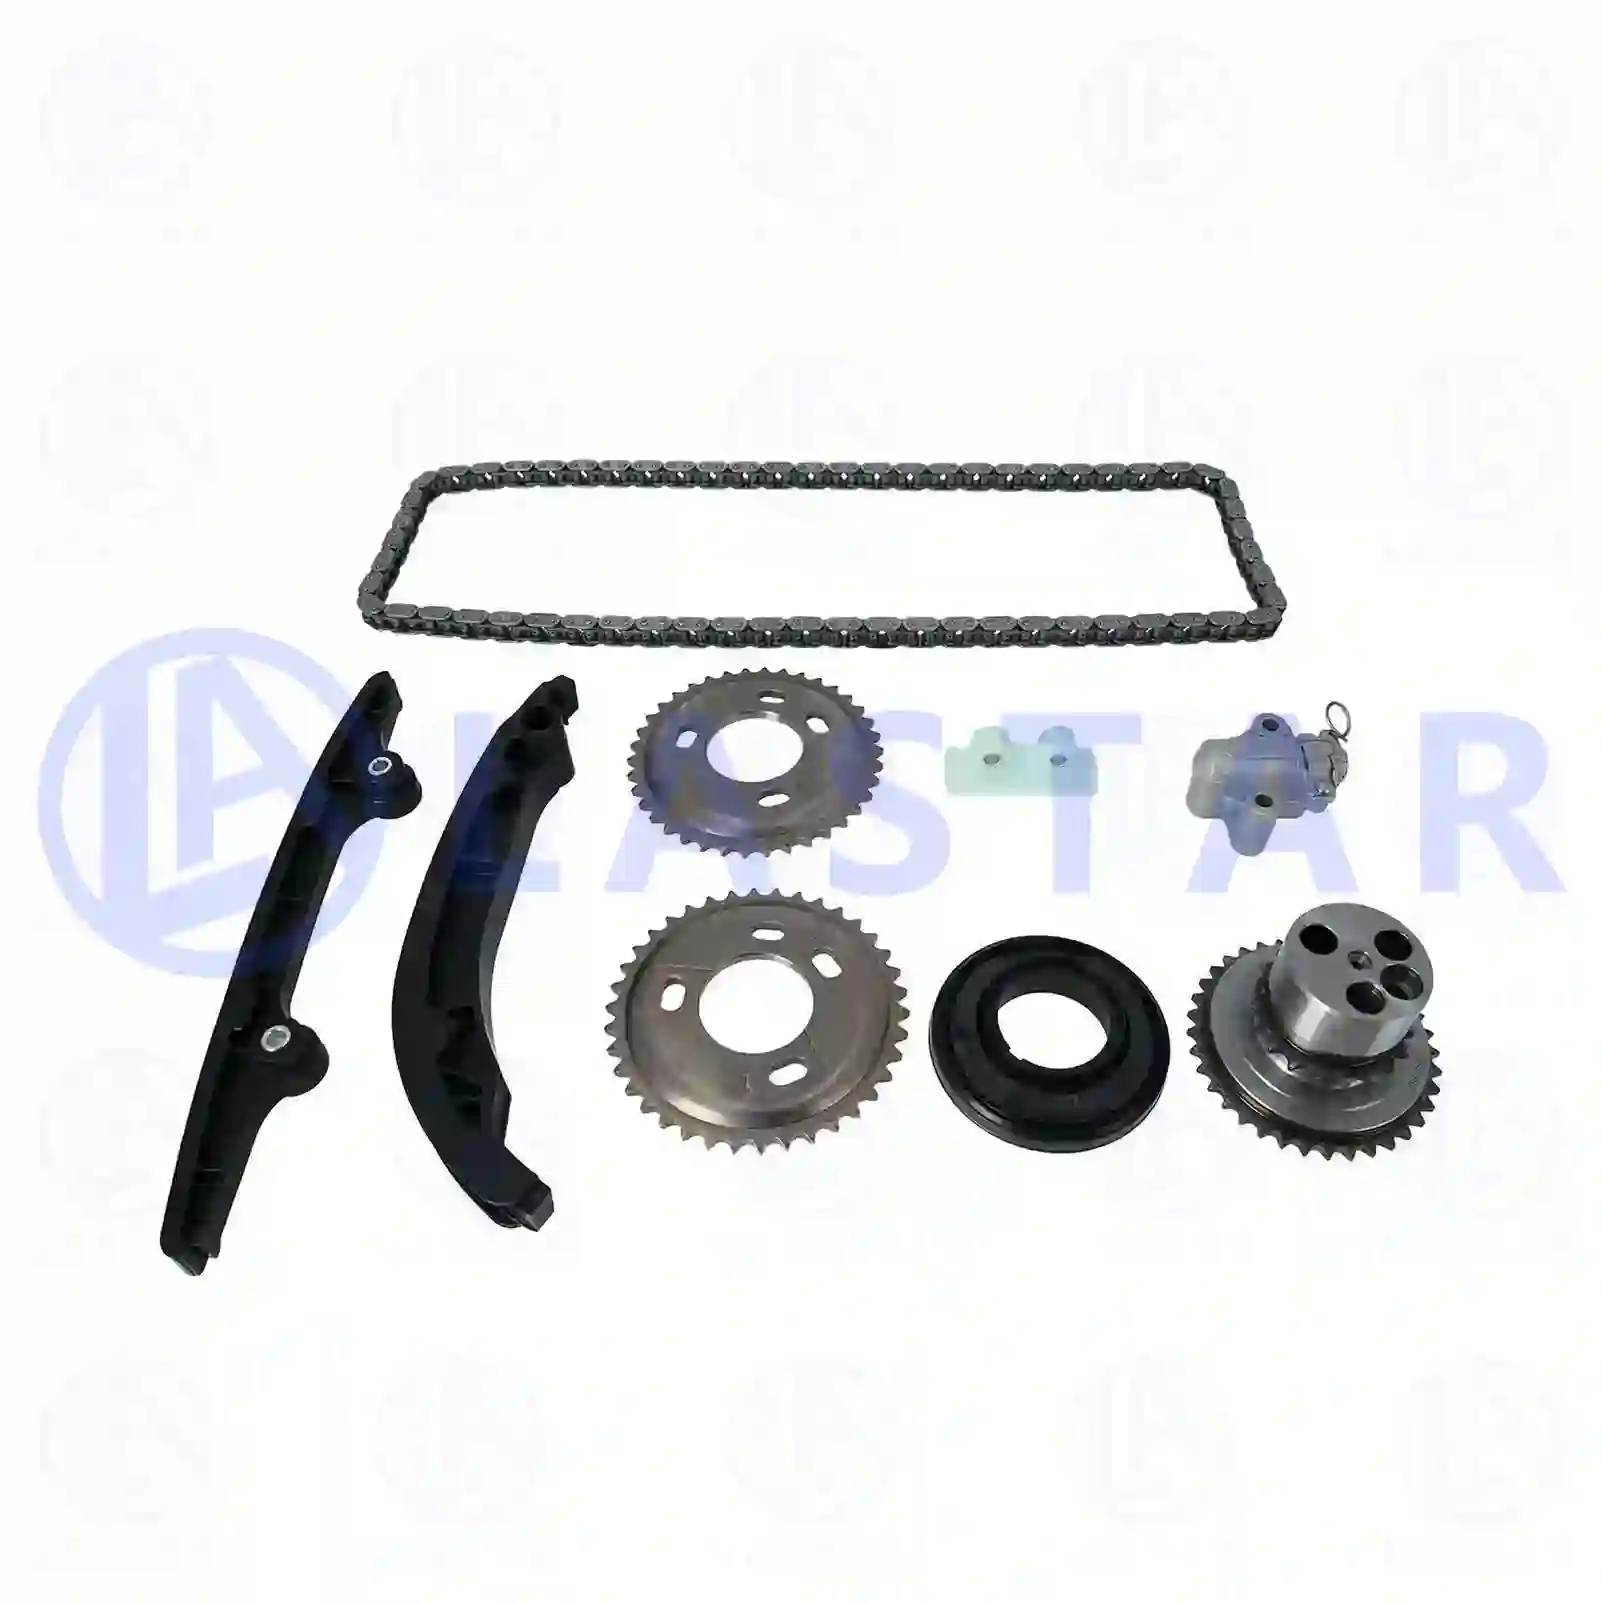 Timing chain kit, 77701087, 1704087S1 ||  77701087 Lastar Spare Part | Truck Spare Parts, Auotomotive Spare Parts Timing chain kit, 77701087, 1704087S1 ||  77701087 Lastar Spare Part | Truck Spare Parts, Auotomotive Spare Parts